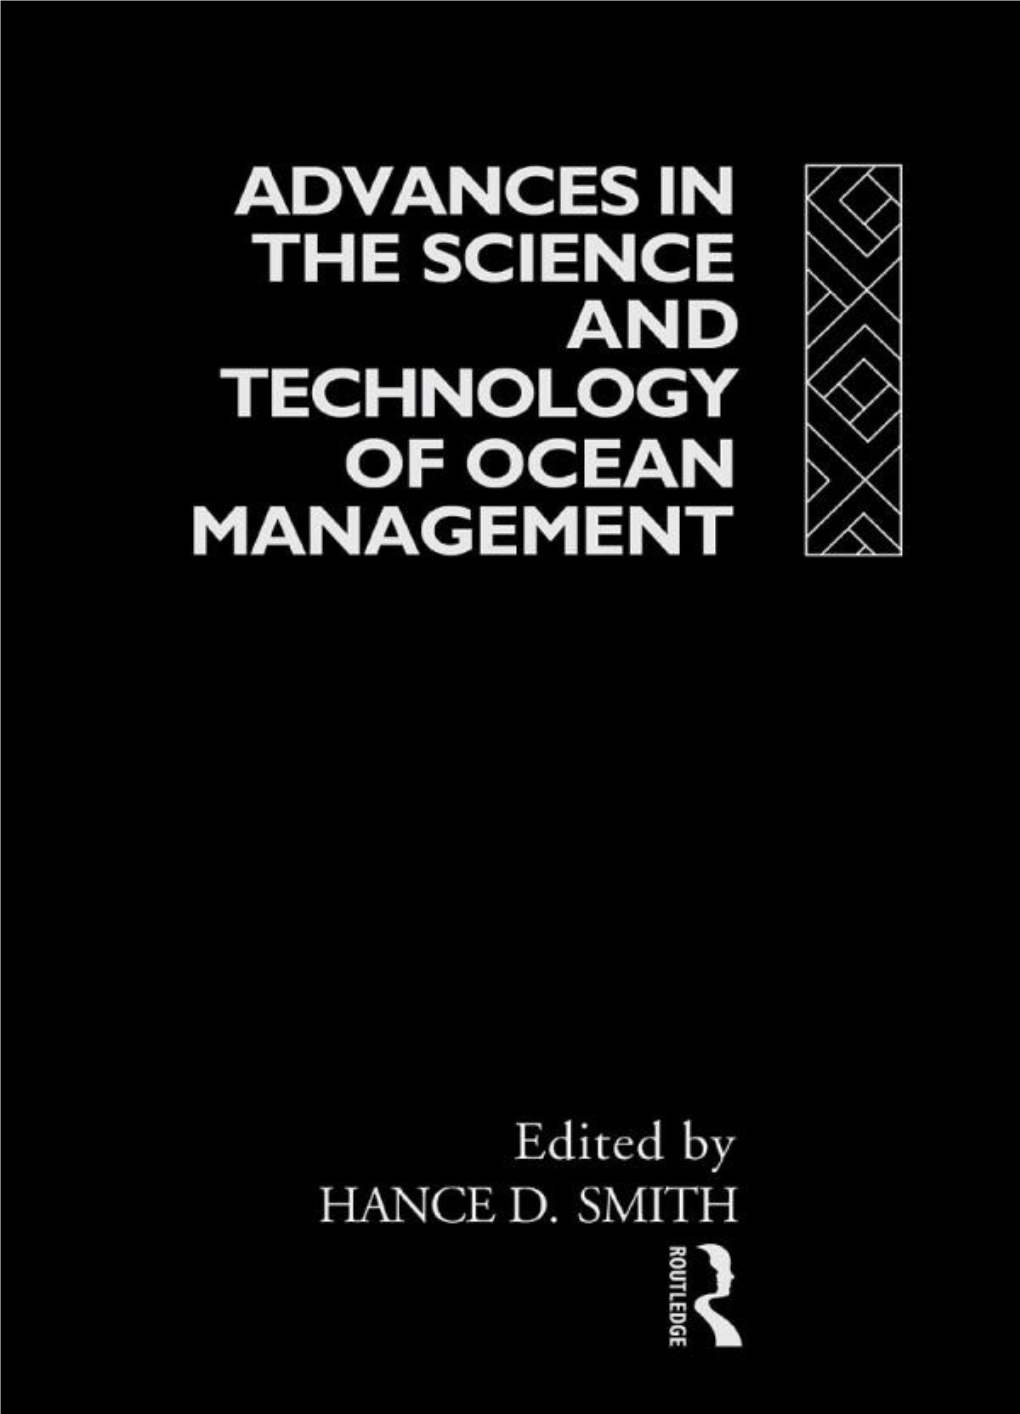 Advances in the Science and Technology of Ocean Management